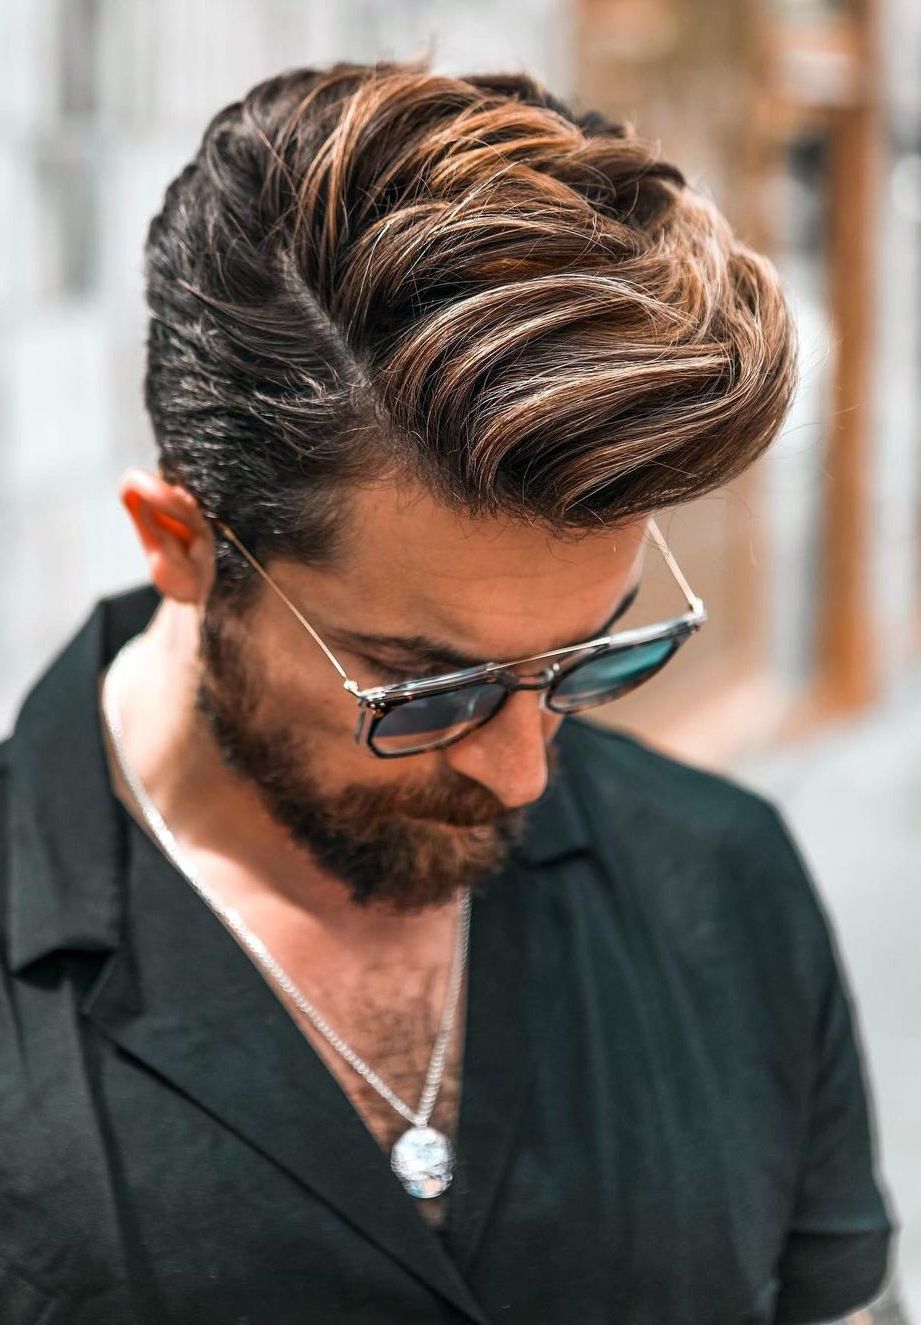 30 Side Part Haircuts: A Classic Style For Gentlemen | Haircut Inspiration With Layered And Side Parted Hairstyles For Short Hair (View 5 of 25)